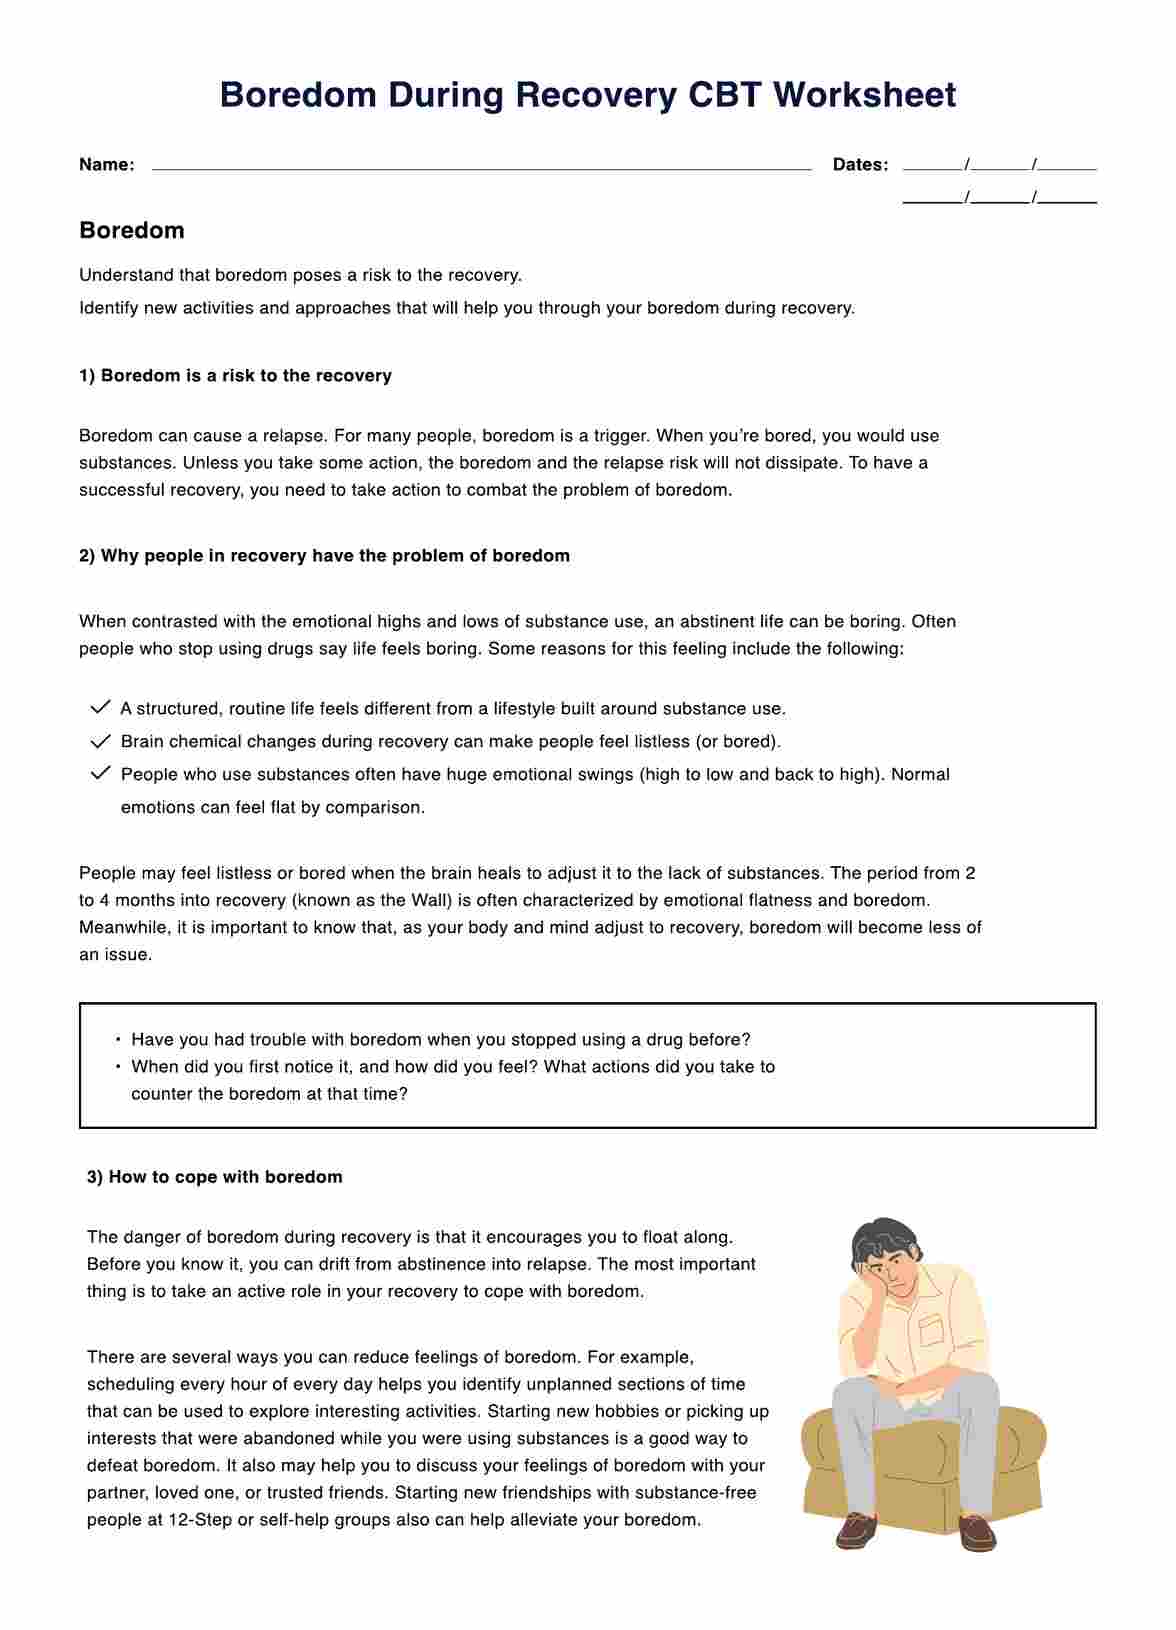 Boredom During Recovery CBT Worksheet PDF Example